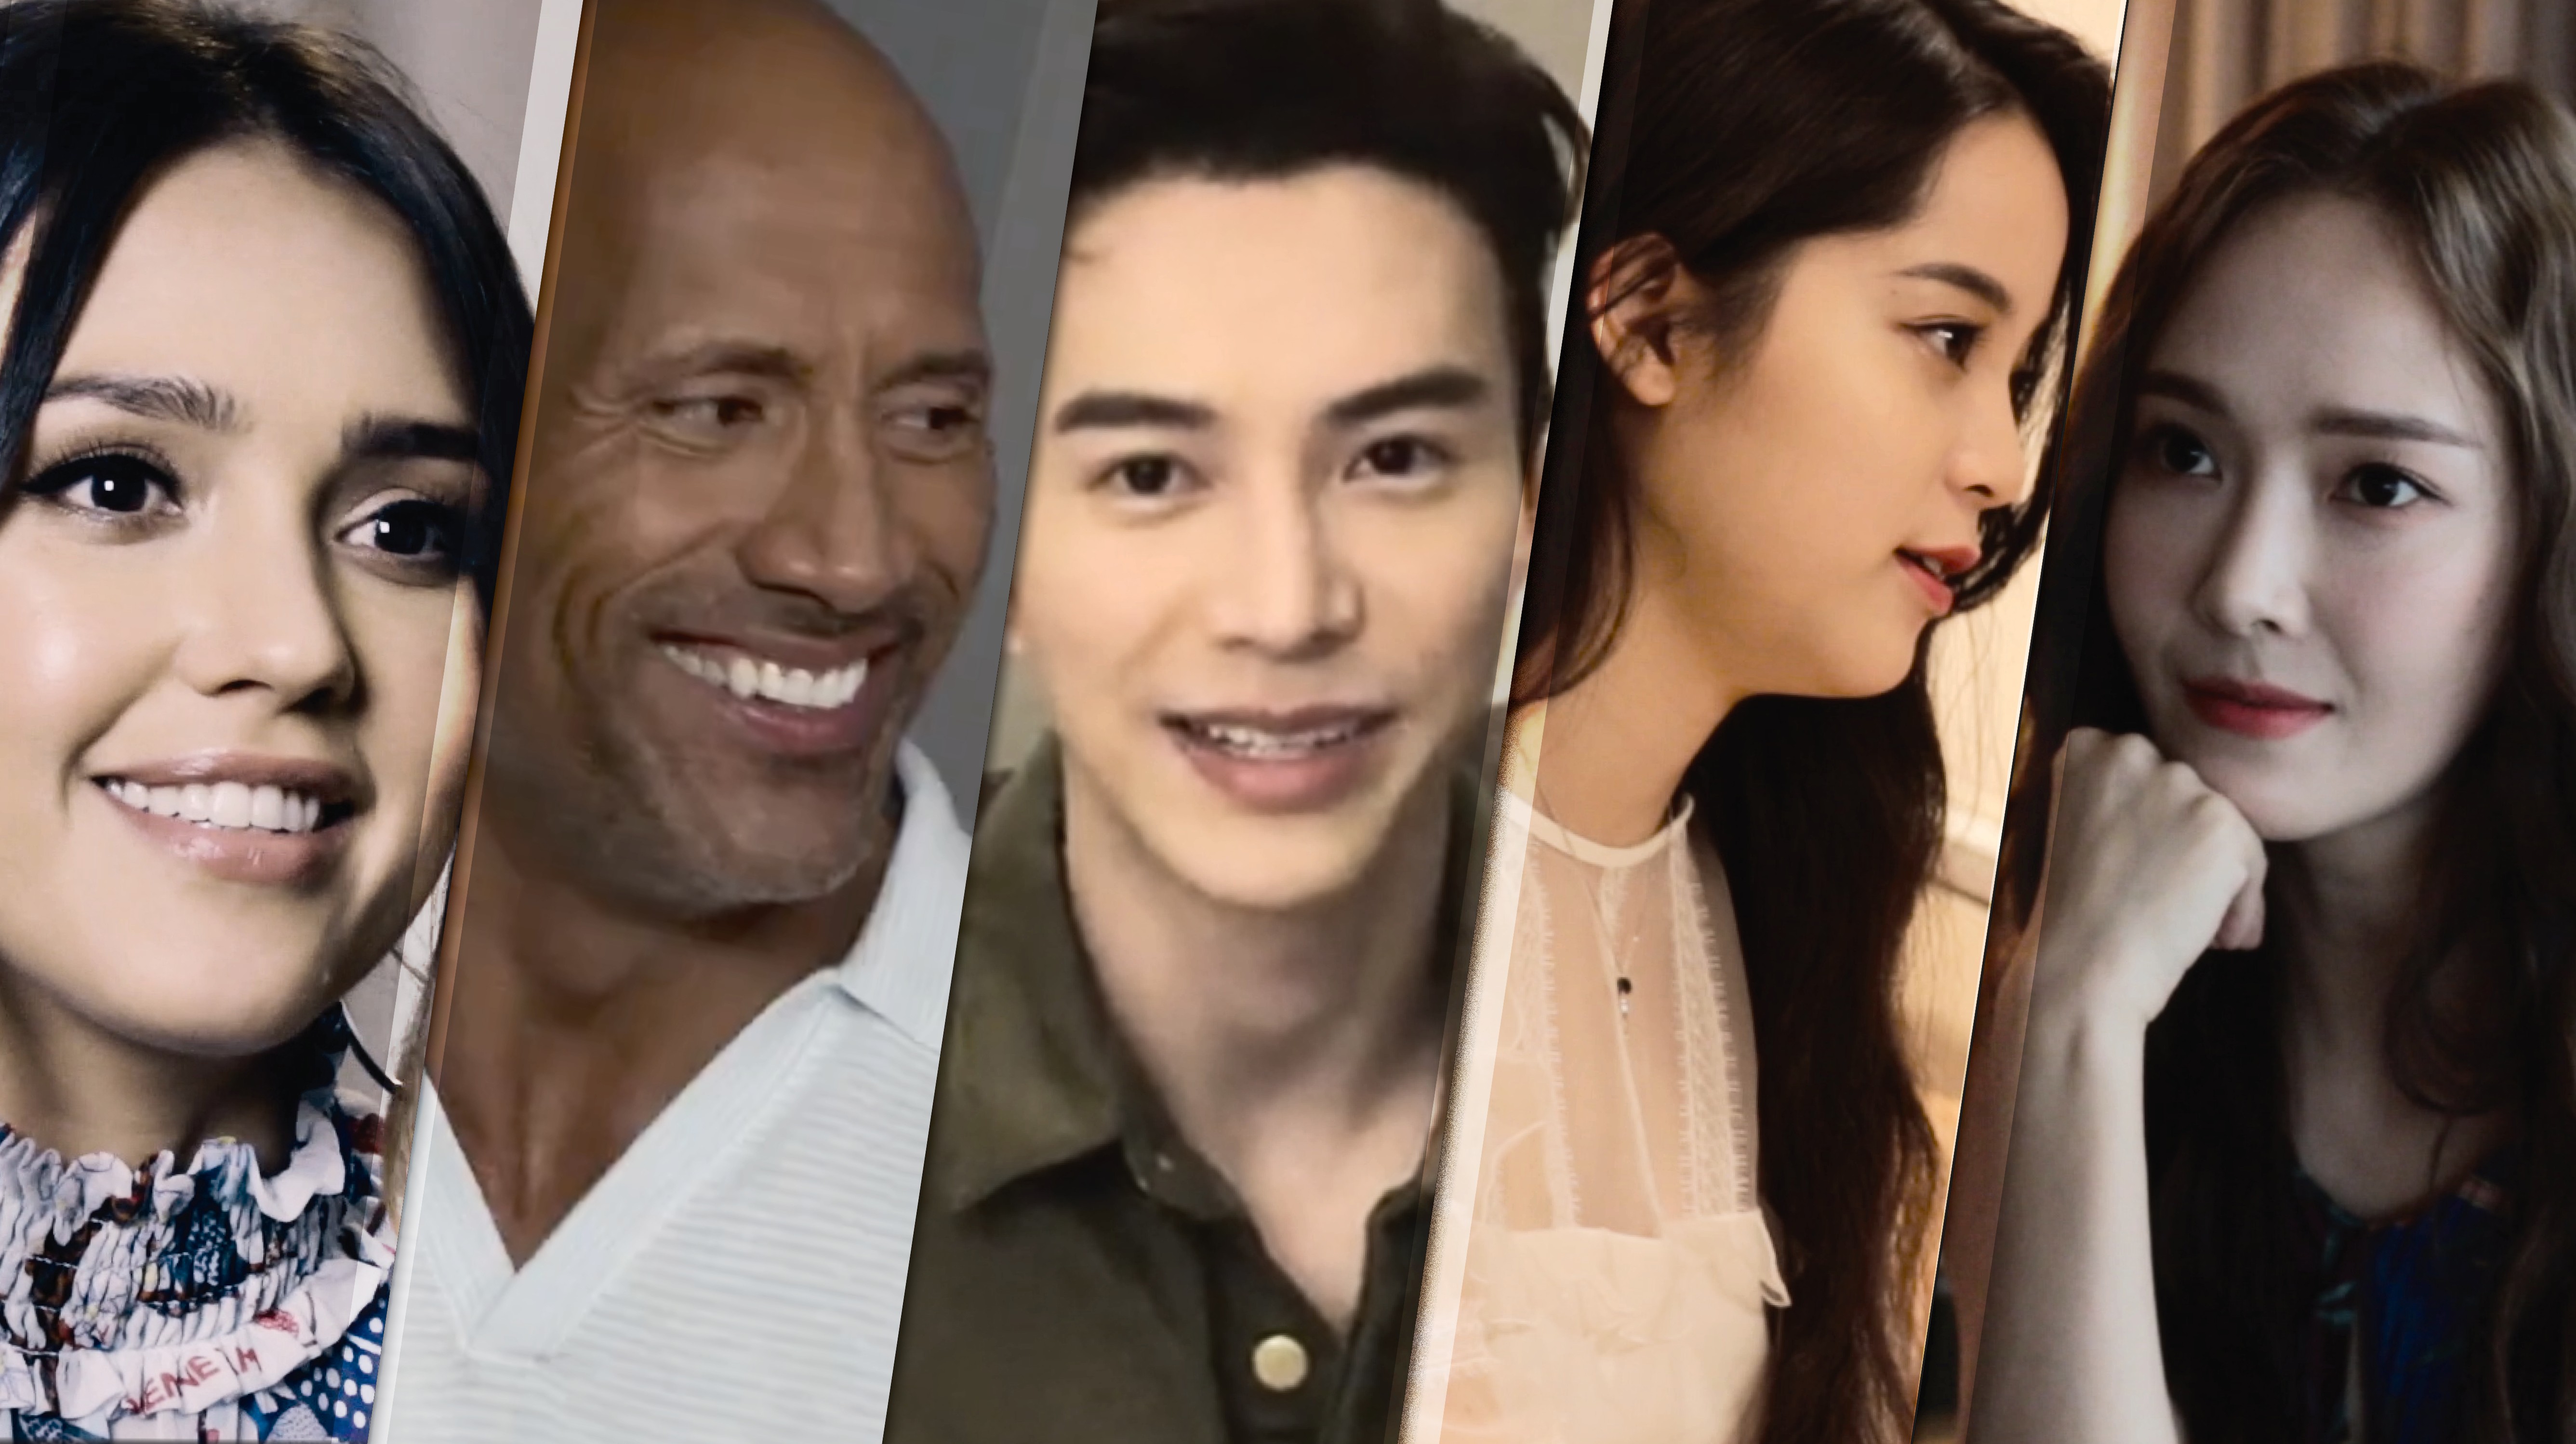 Some of the celebrities Style talked to this year: (from left) Jessica Alba, Dwayne ‘The Rock’ Johnson, Lawrence Wong, Ouyang Nana and Jessica Jung.